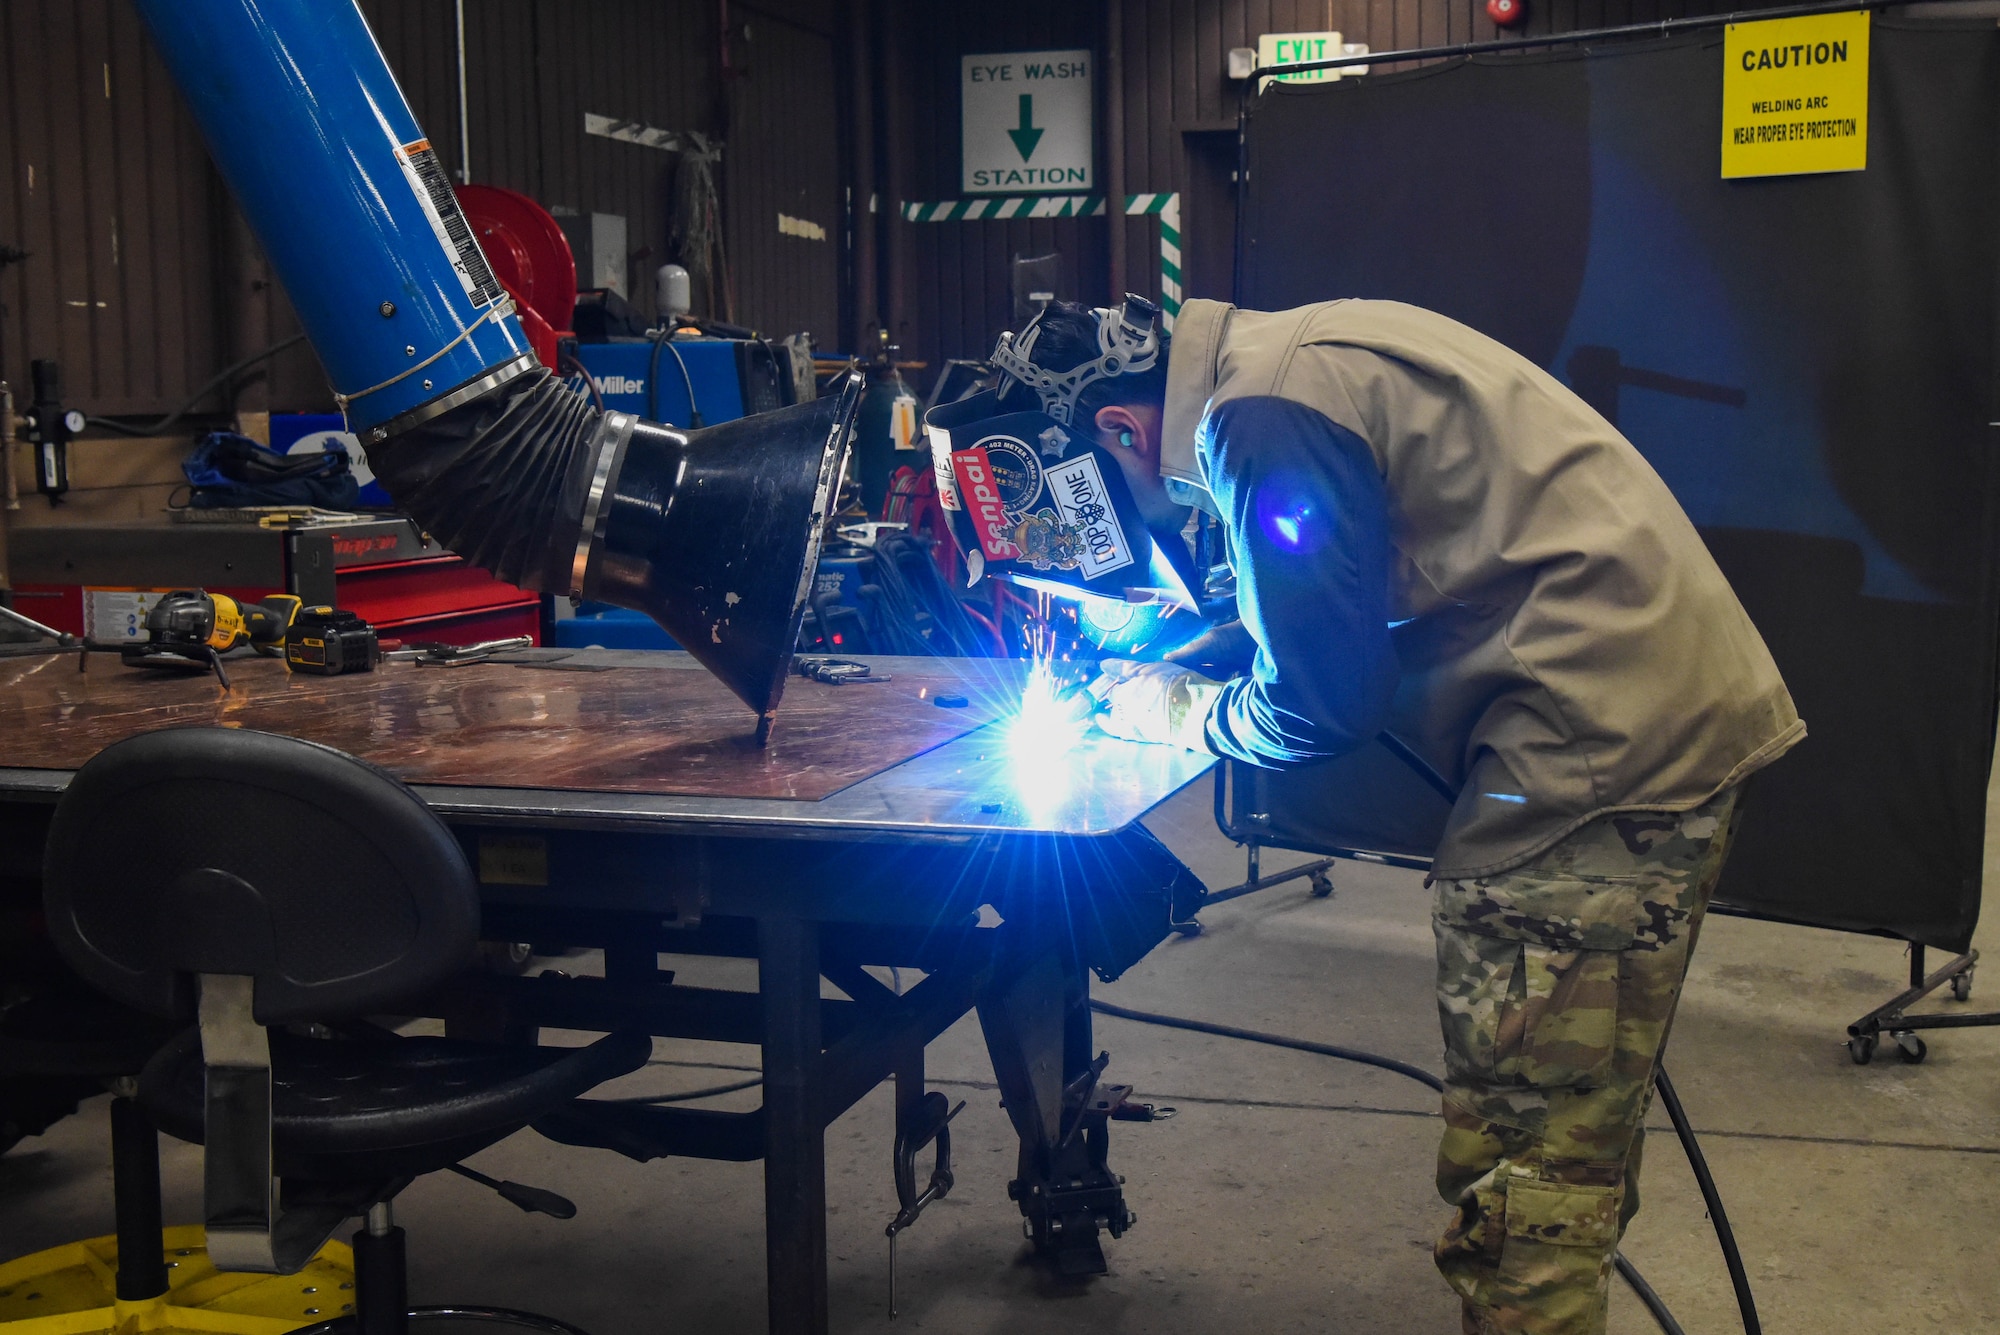 U.S. Air Force Staff Sgt. Clement Chhay, 51st Maintenance Squadron metals technology craftsman, trains on welding techniques at Osan Air Base, Republic of Korea, Dec. 22, 2023. Consistent training cultivates a proficiency level that enables metals technicians from the 51st MXS to swiftly maintain critical aircraft structures when called upon. (U.S. Air Force photo by Senior Airman Brittany Russell)